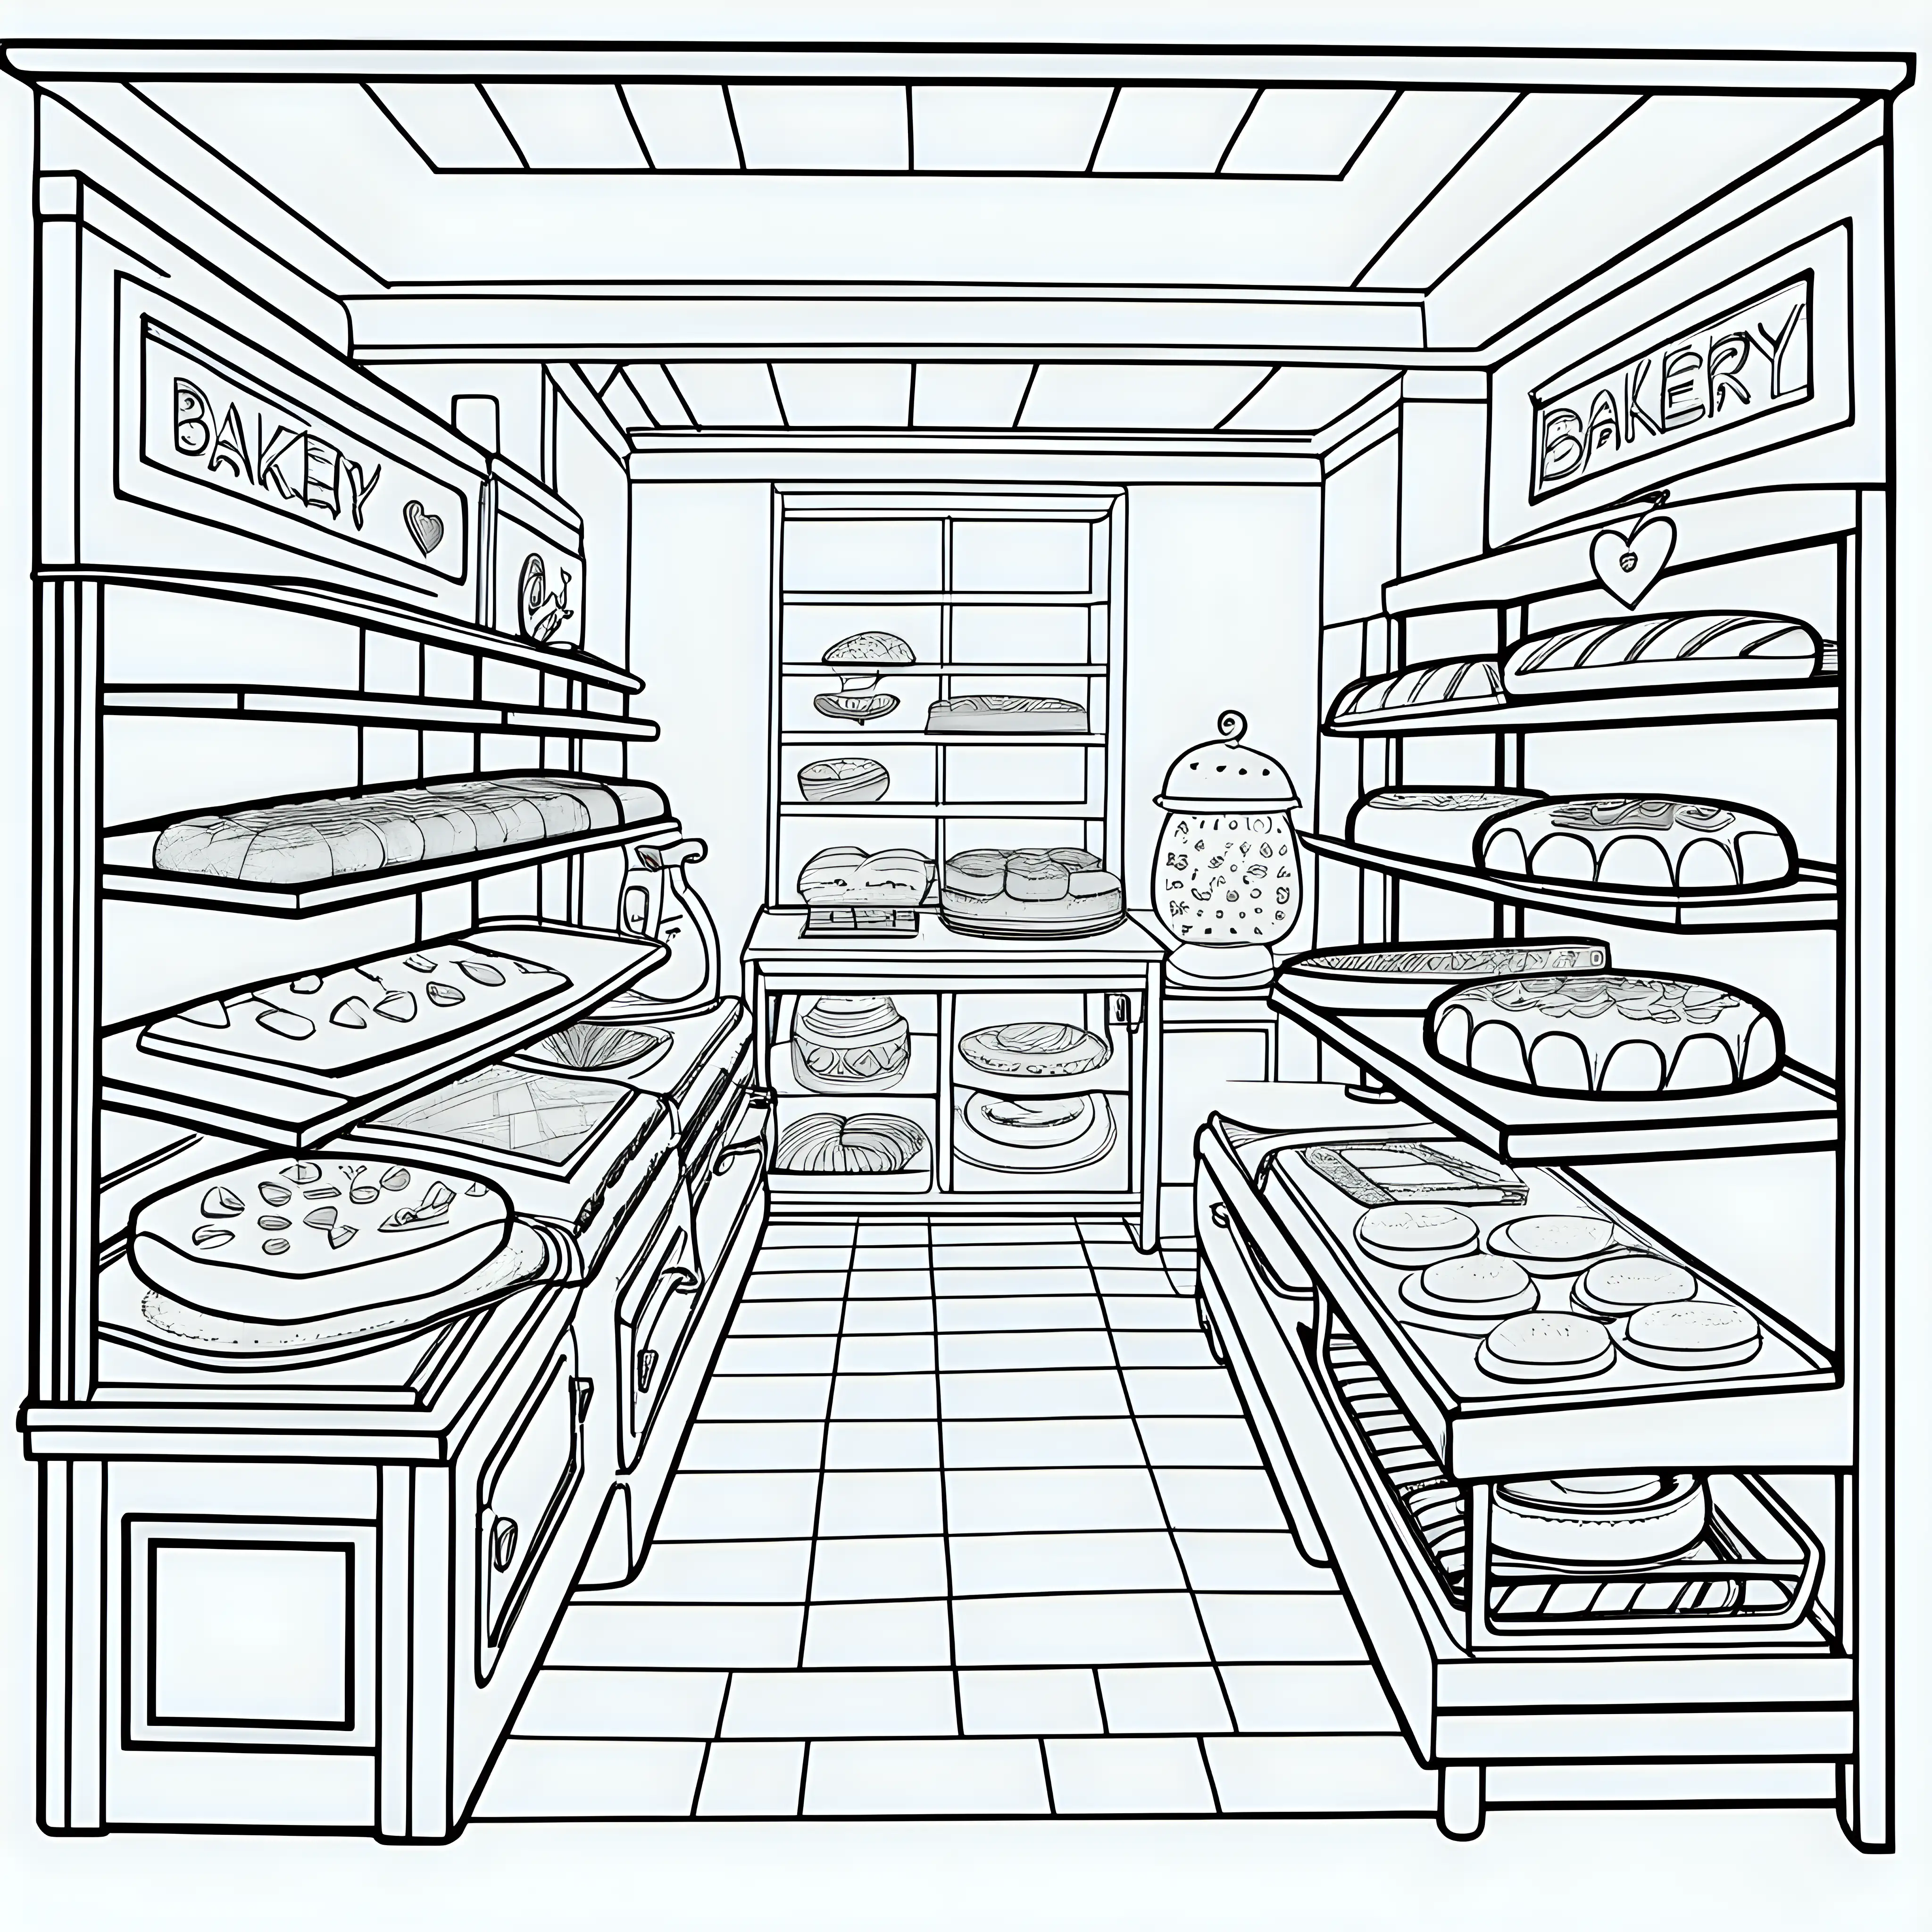 Create a coloring book page Valentine's Day Bakery: A bakery scene with ovens, rolling pins, and trays of baked goods. Use crisp lines and white background. Make it an easy-to-color design for children. --ar 17:22--model raw